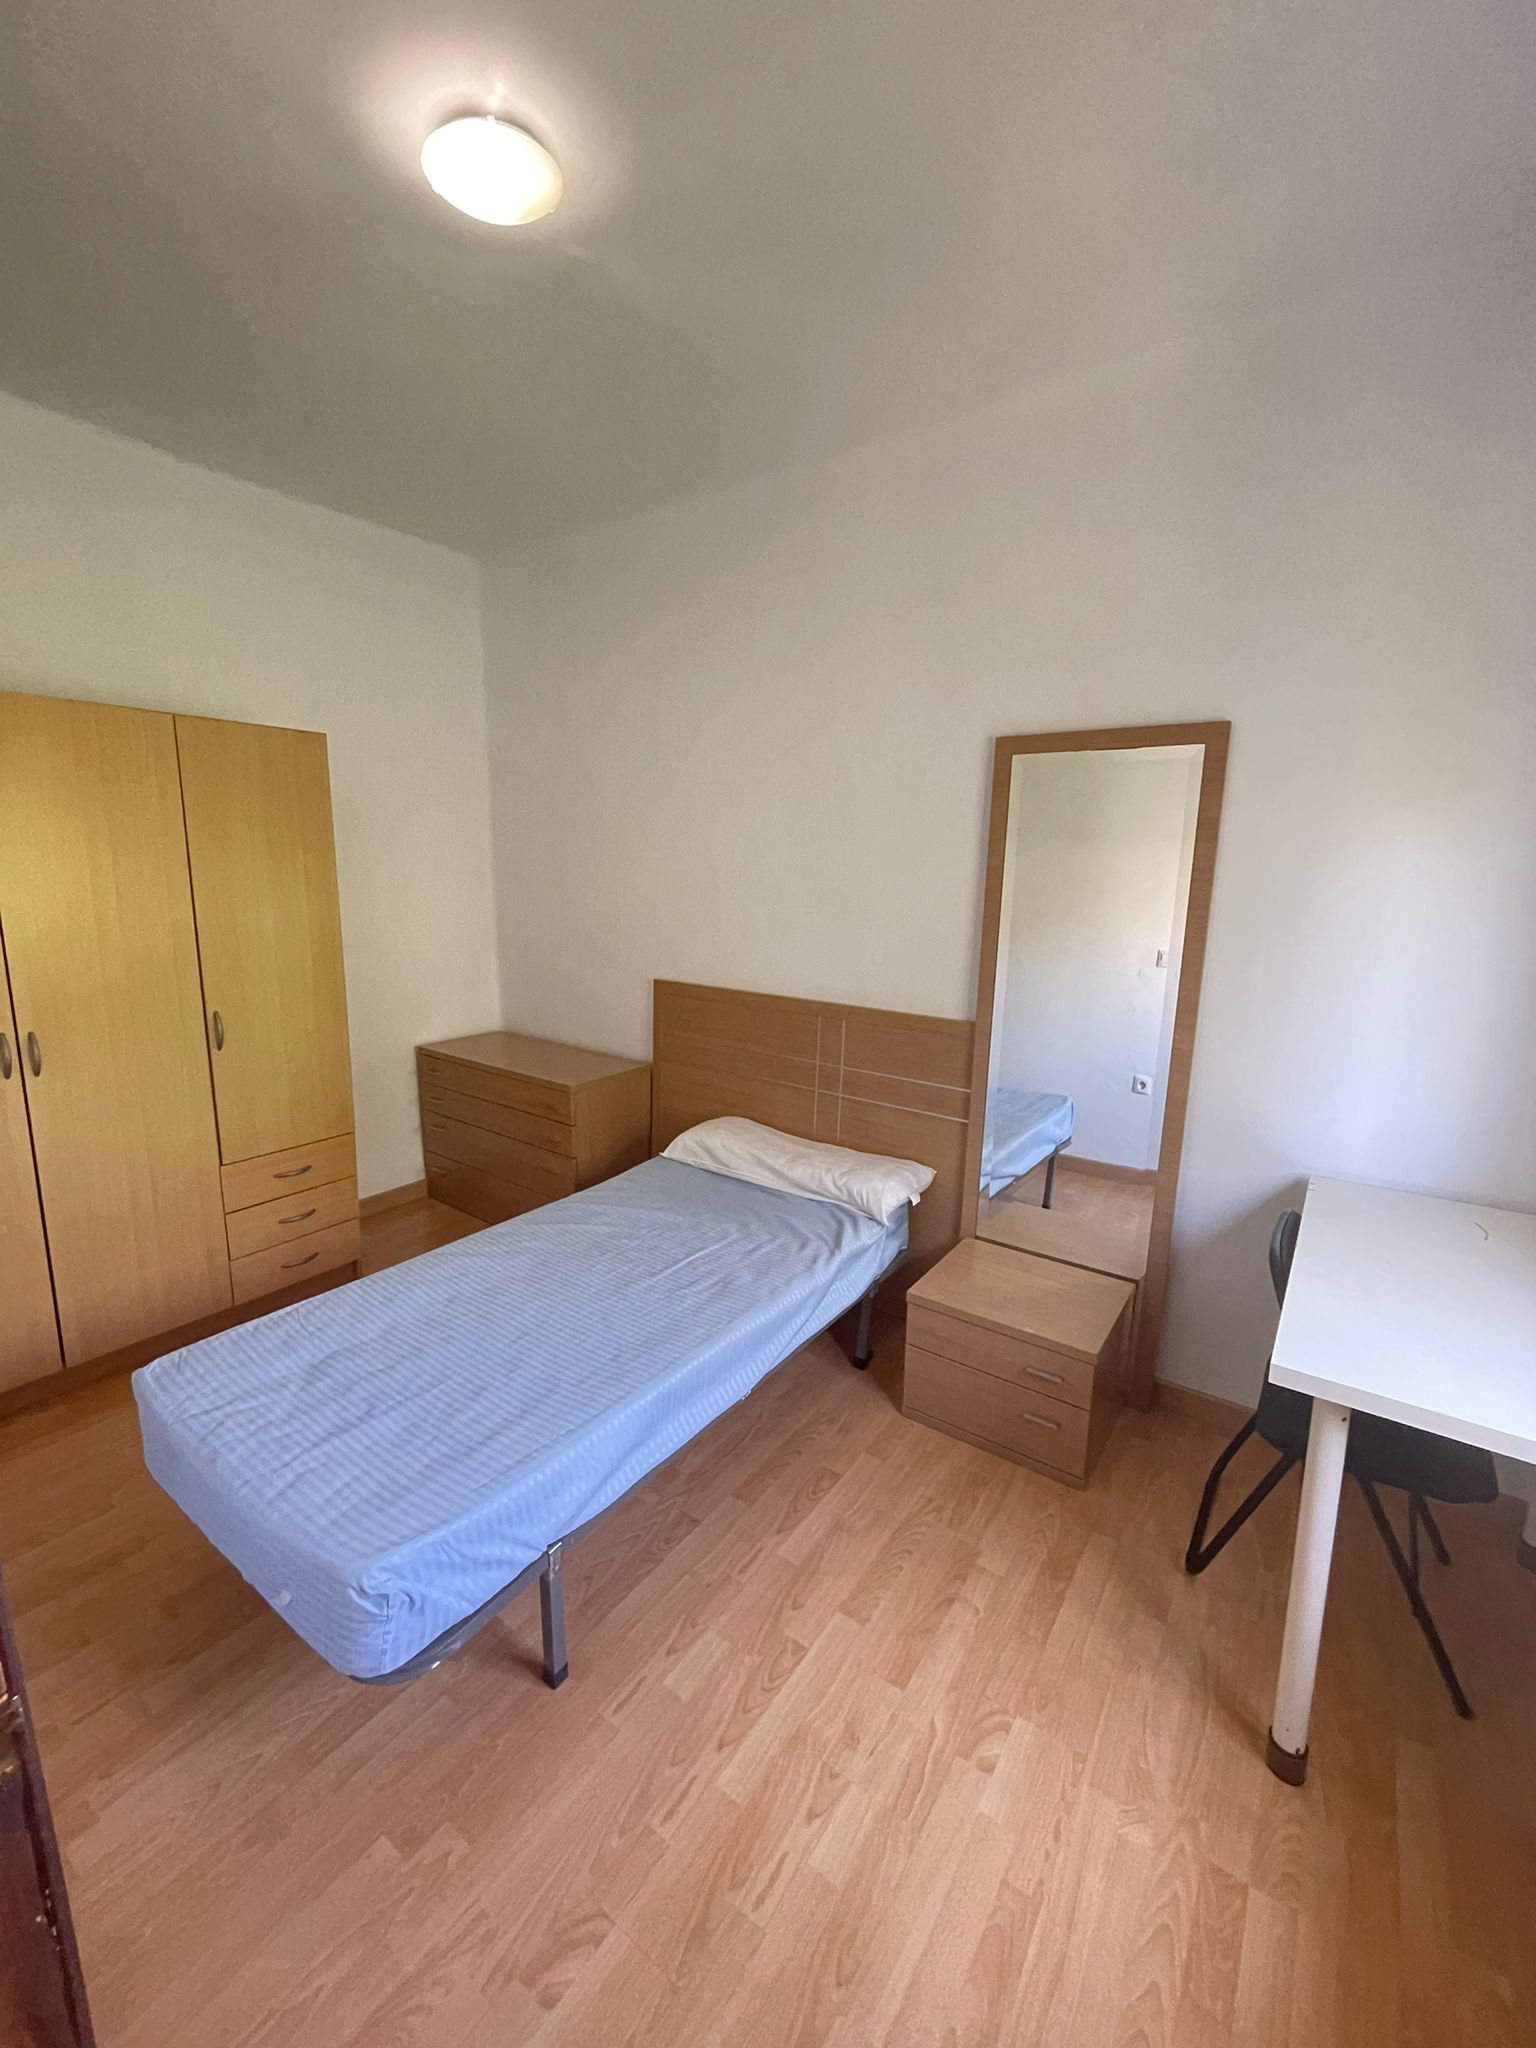 Comfortable room in Triana perfect for student